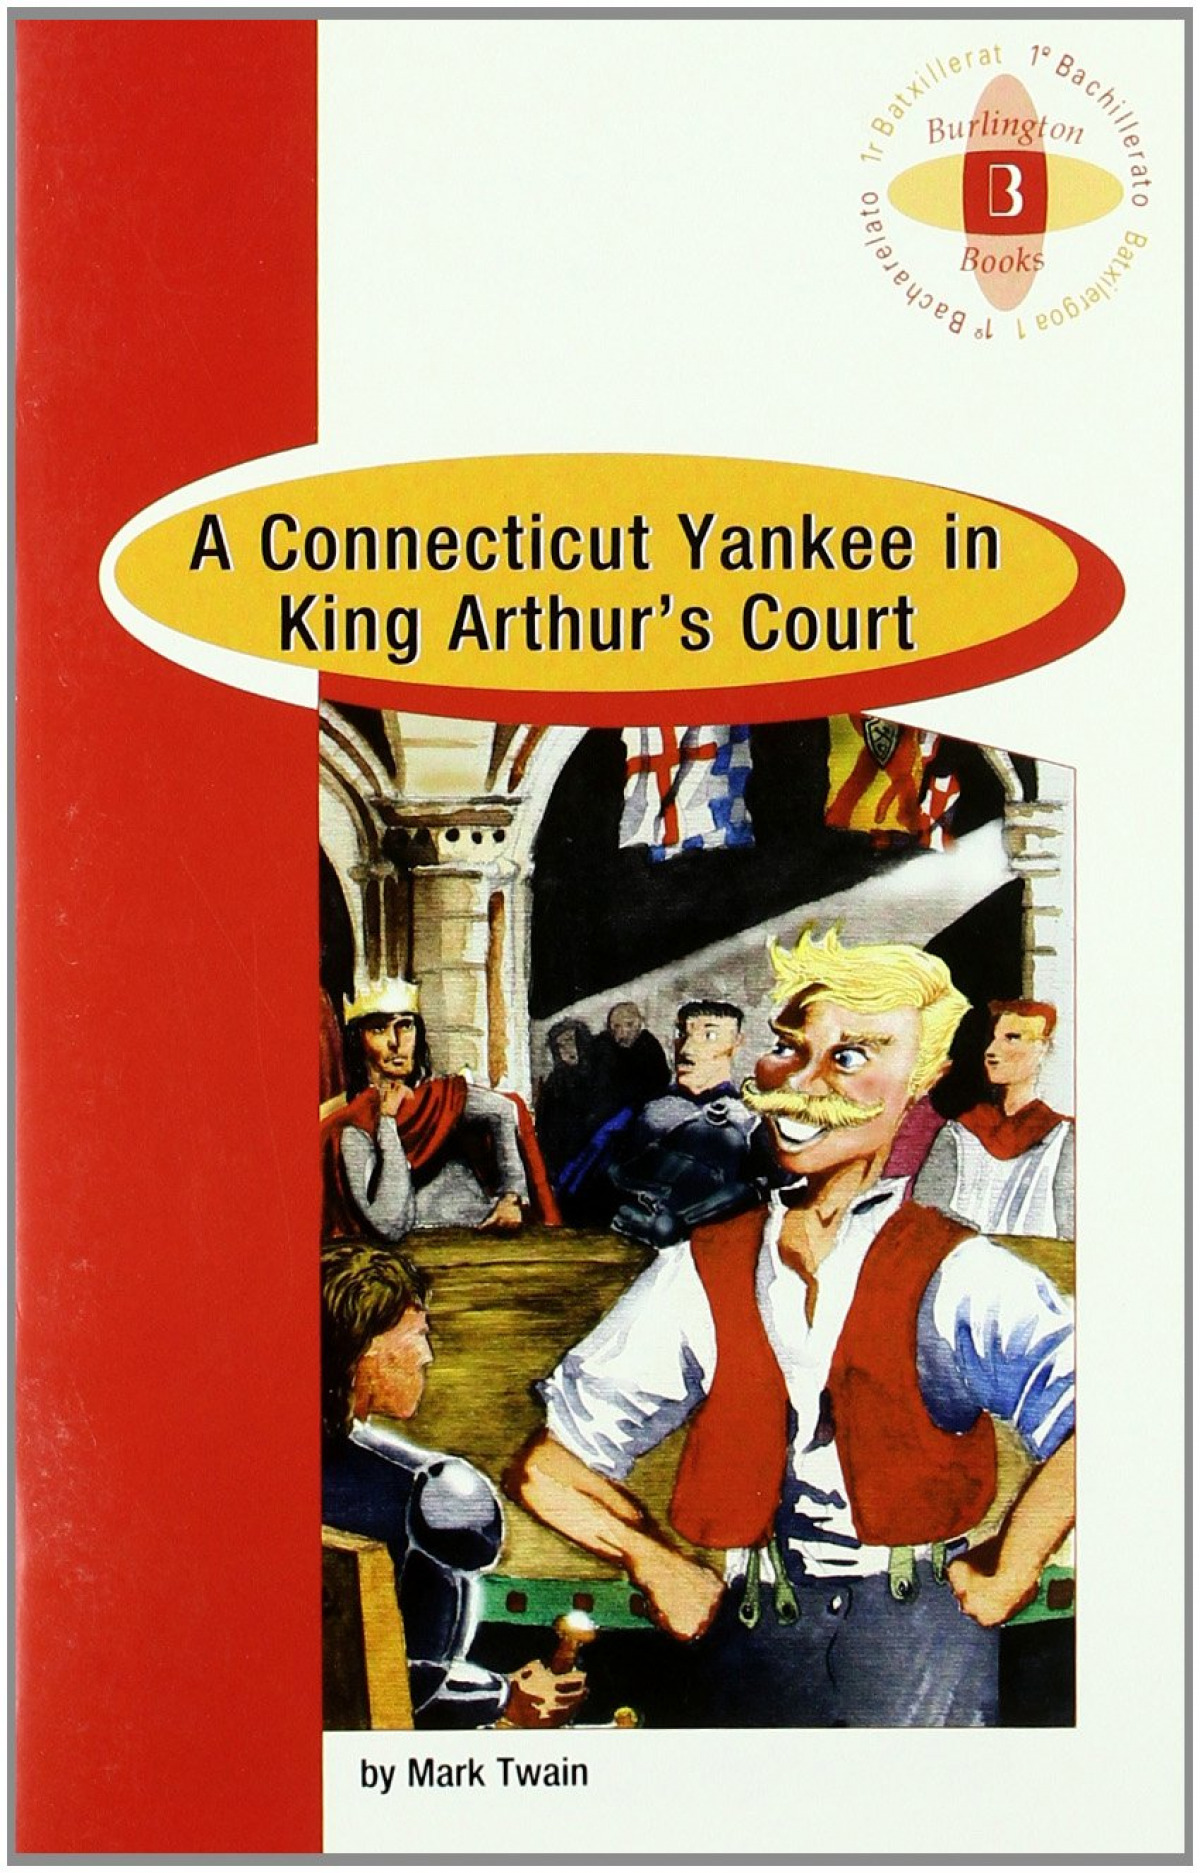 A connecticut yankee in king arthurs court-1 bach - Aa.Vv.